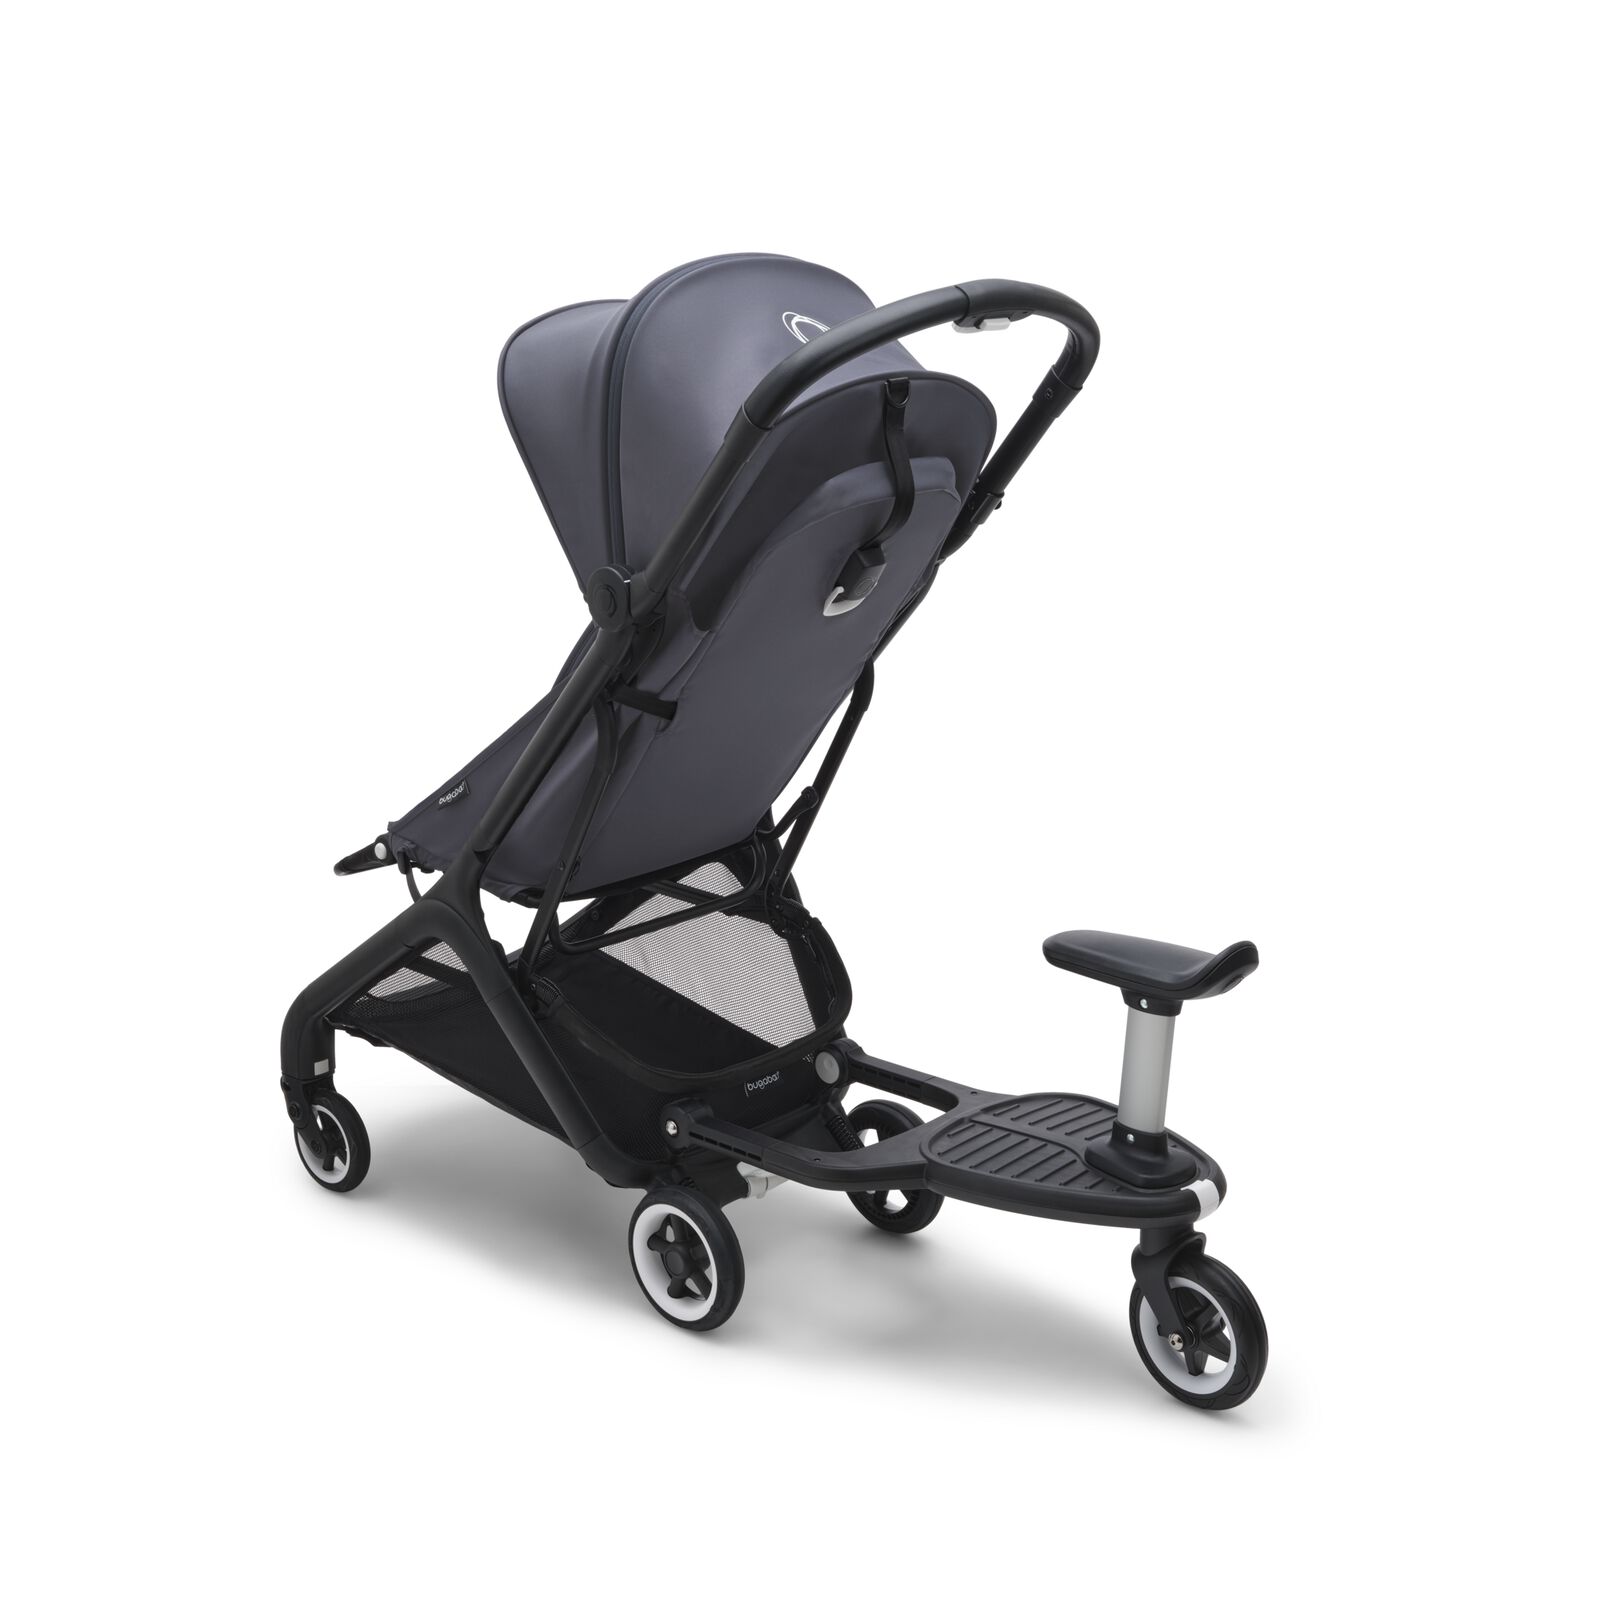 Bugaboo Butterfly stroller with a comfort wheeled board attached with seat.